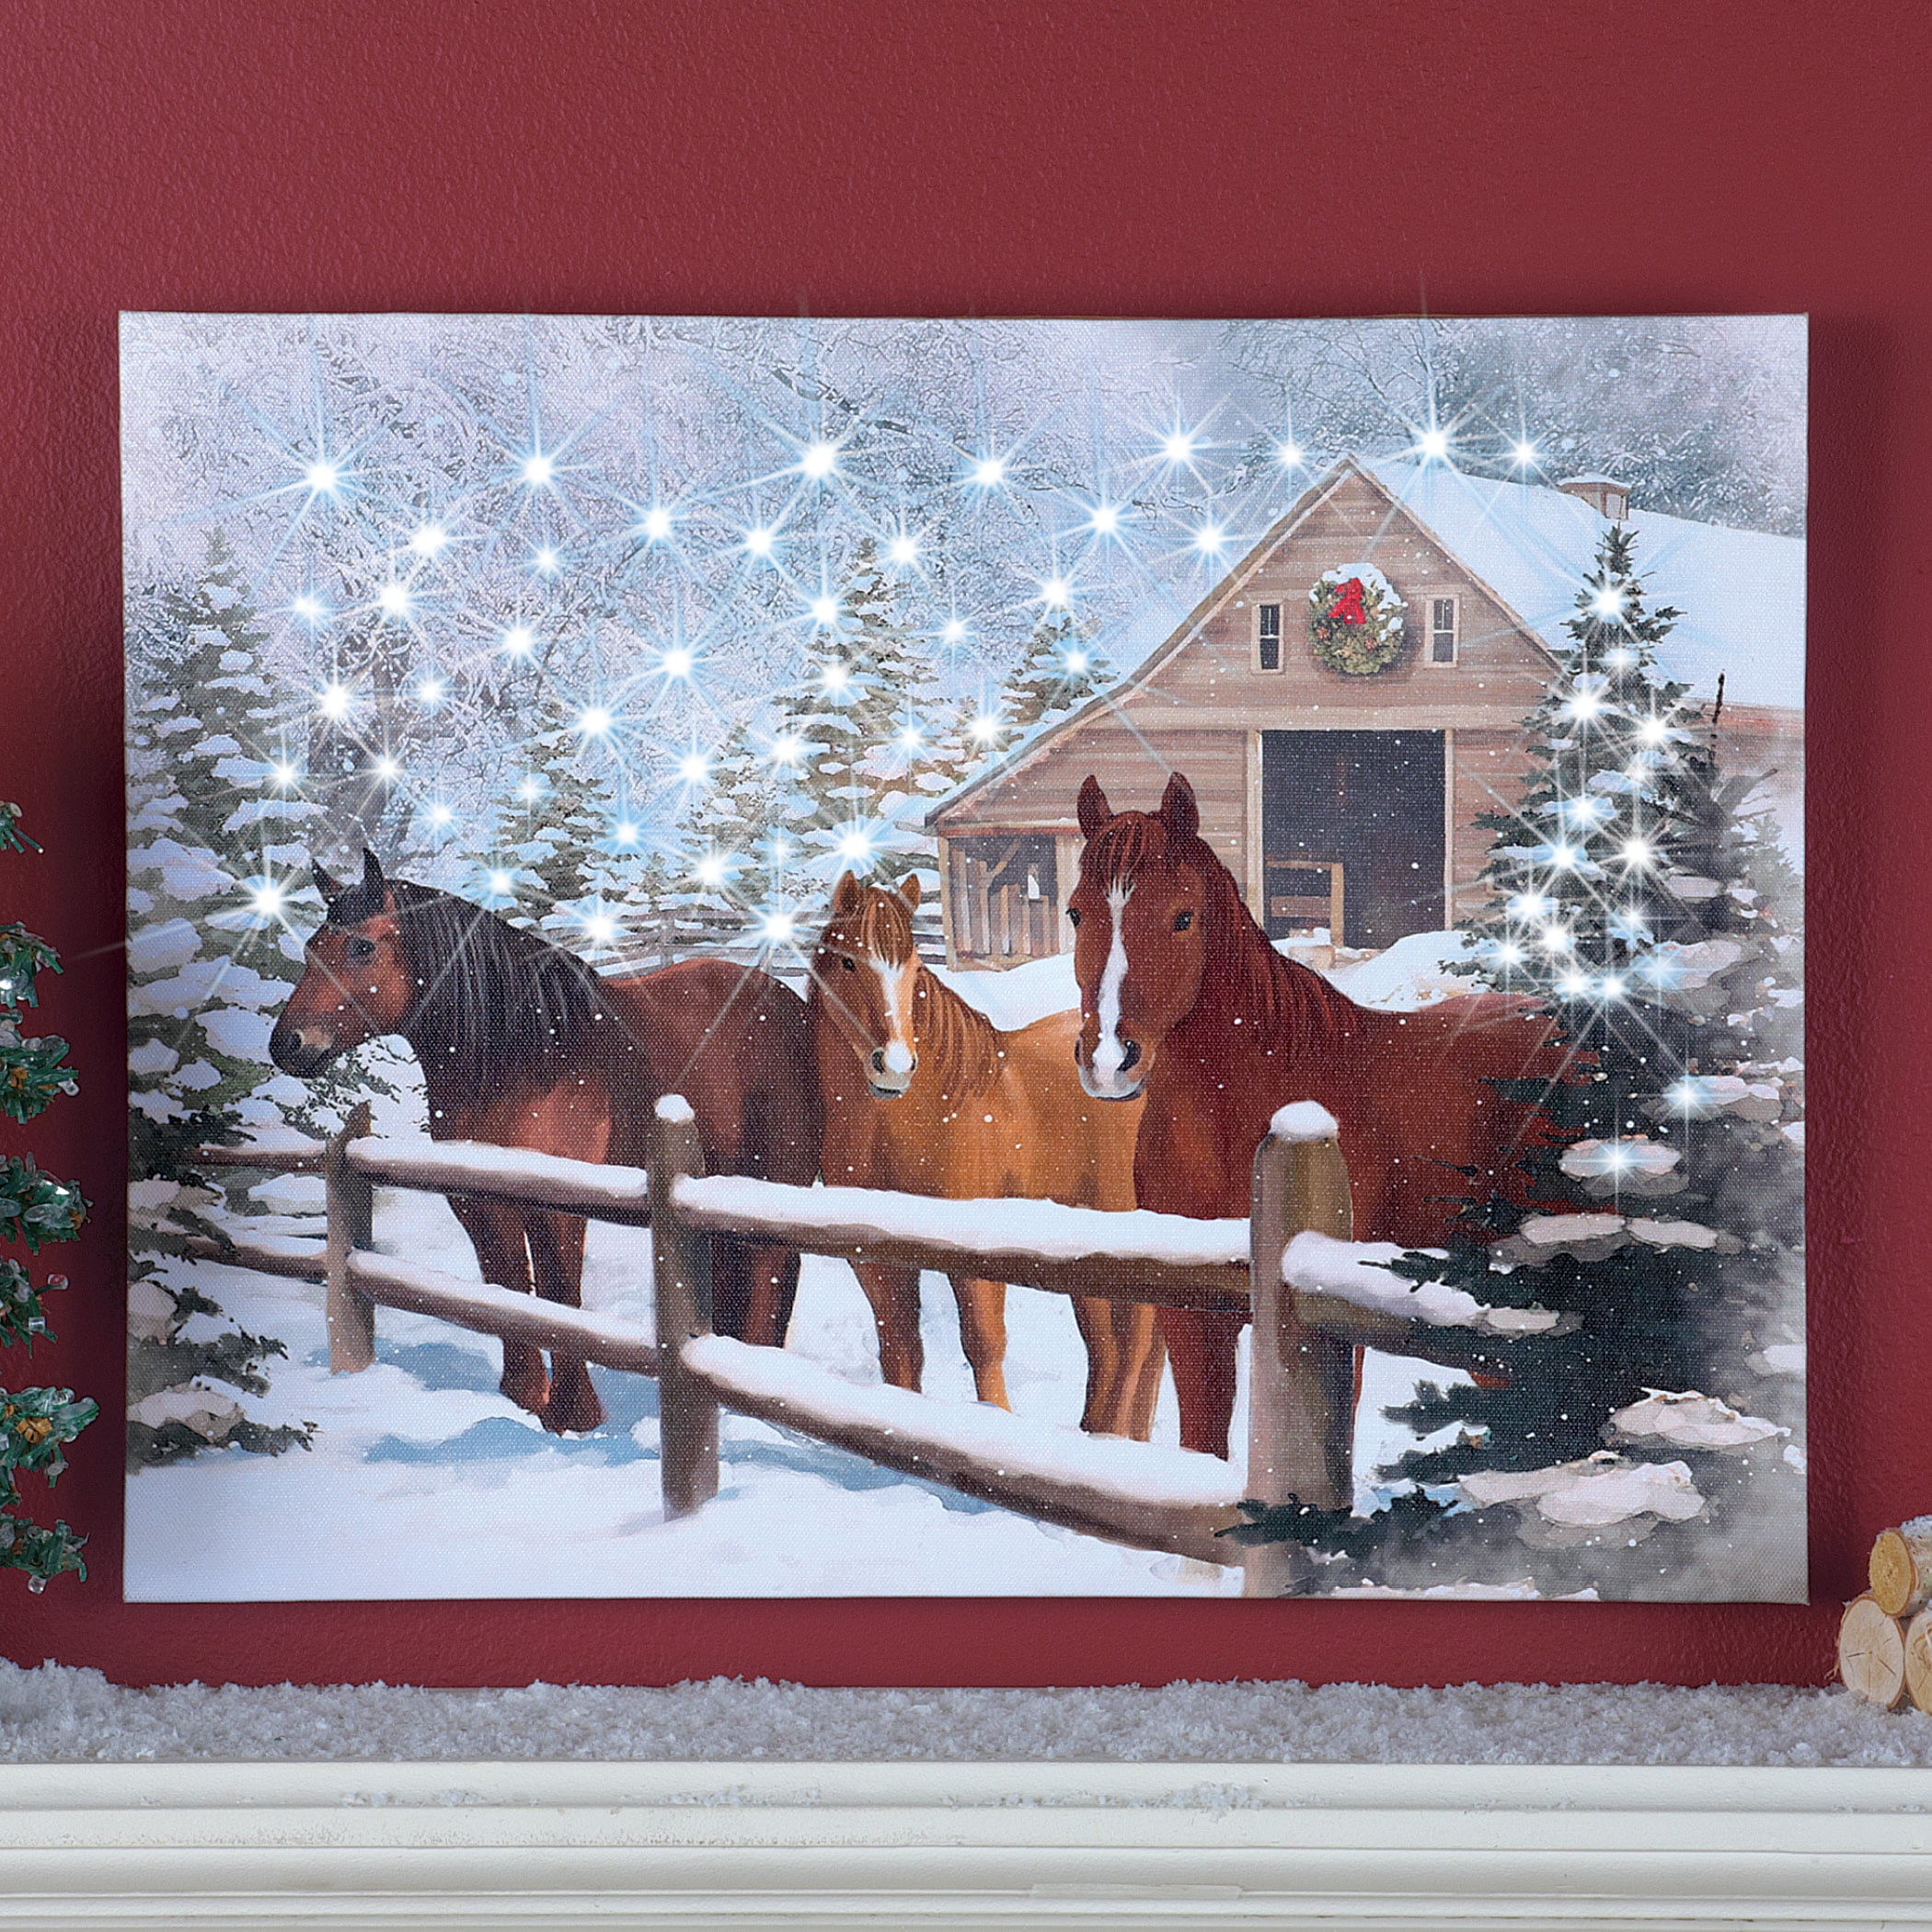 LOVELY HORSES NATURE WINTER SCENERY-Print Home Decor Wall Art choose your size 